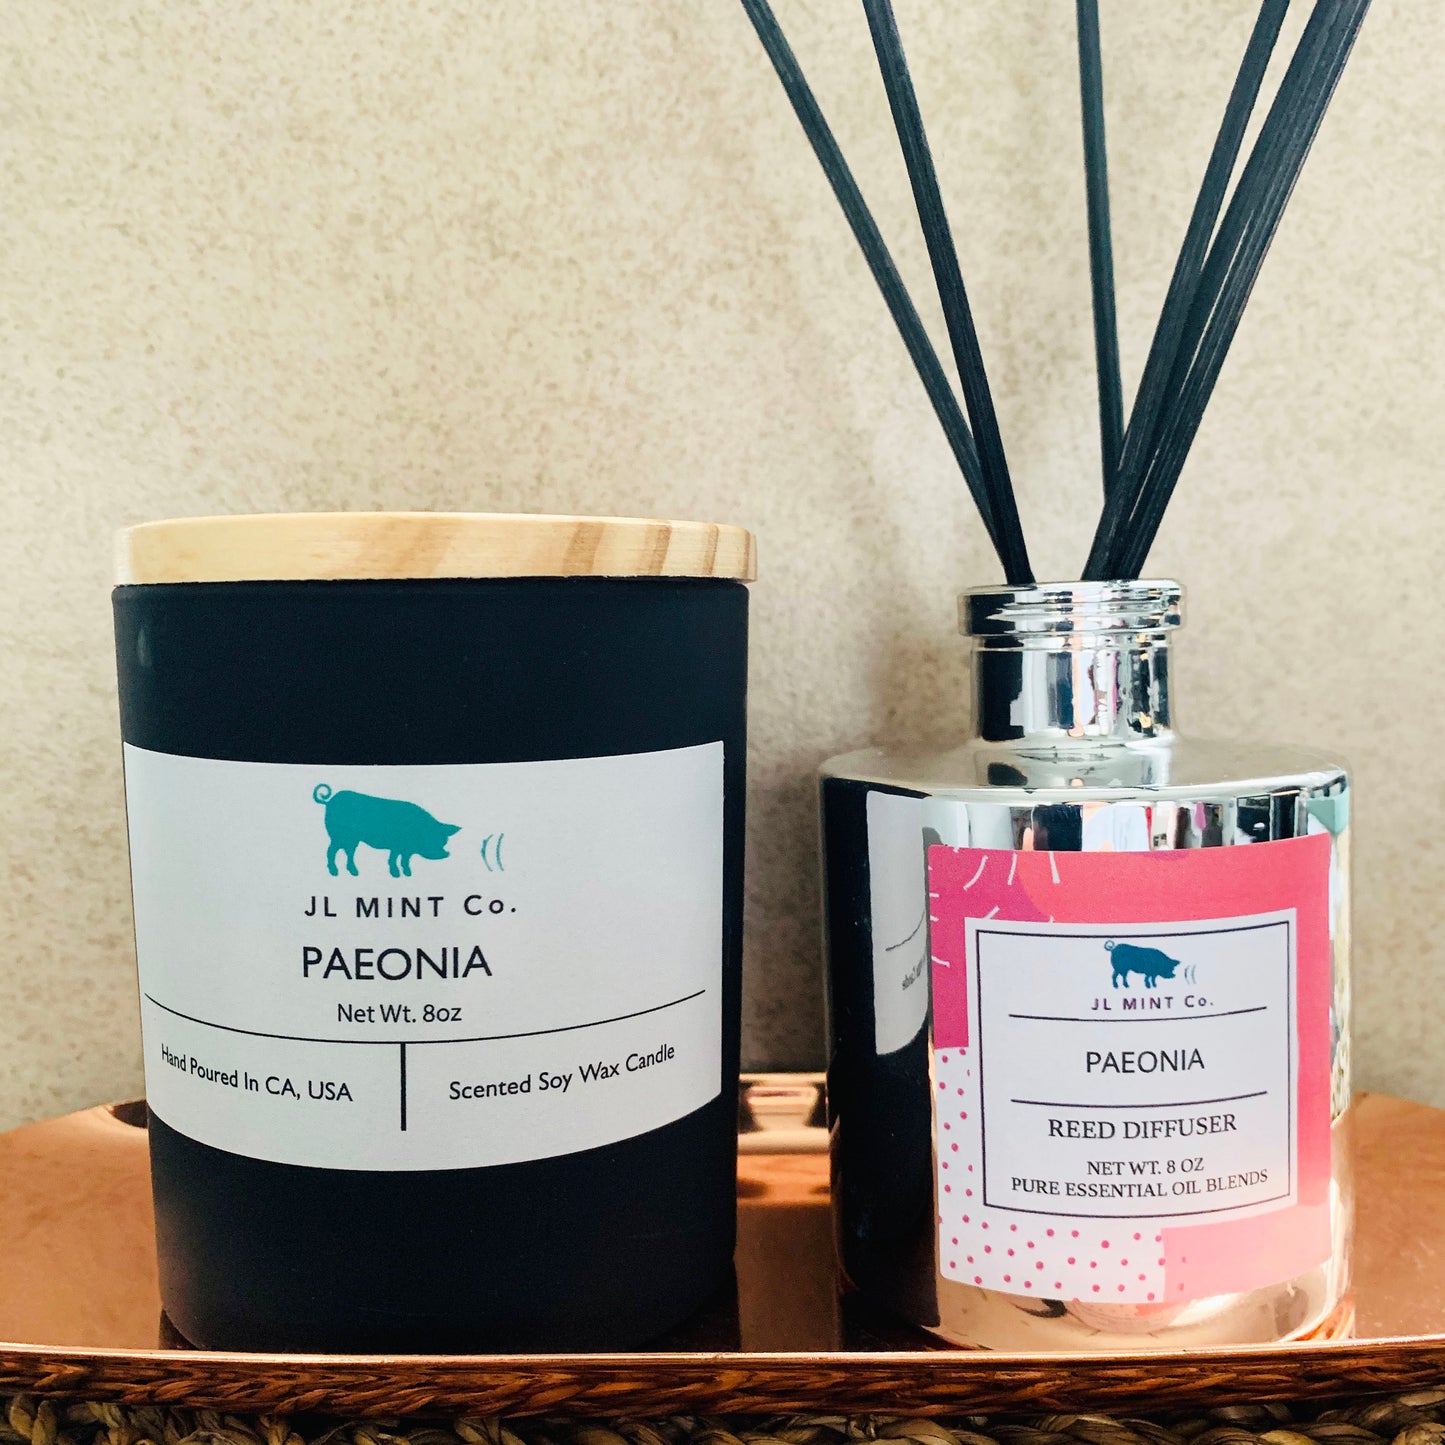 PAEONIA JL Mint Co. Soy Wax Candle